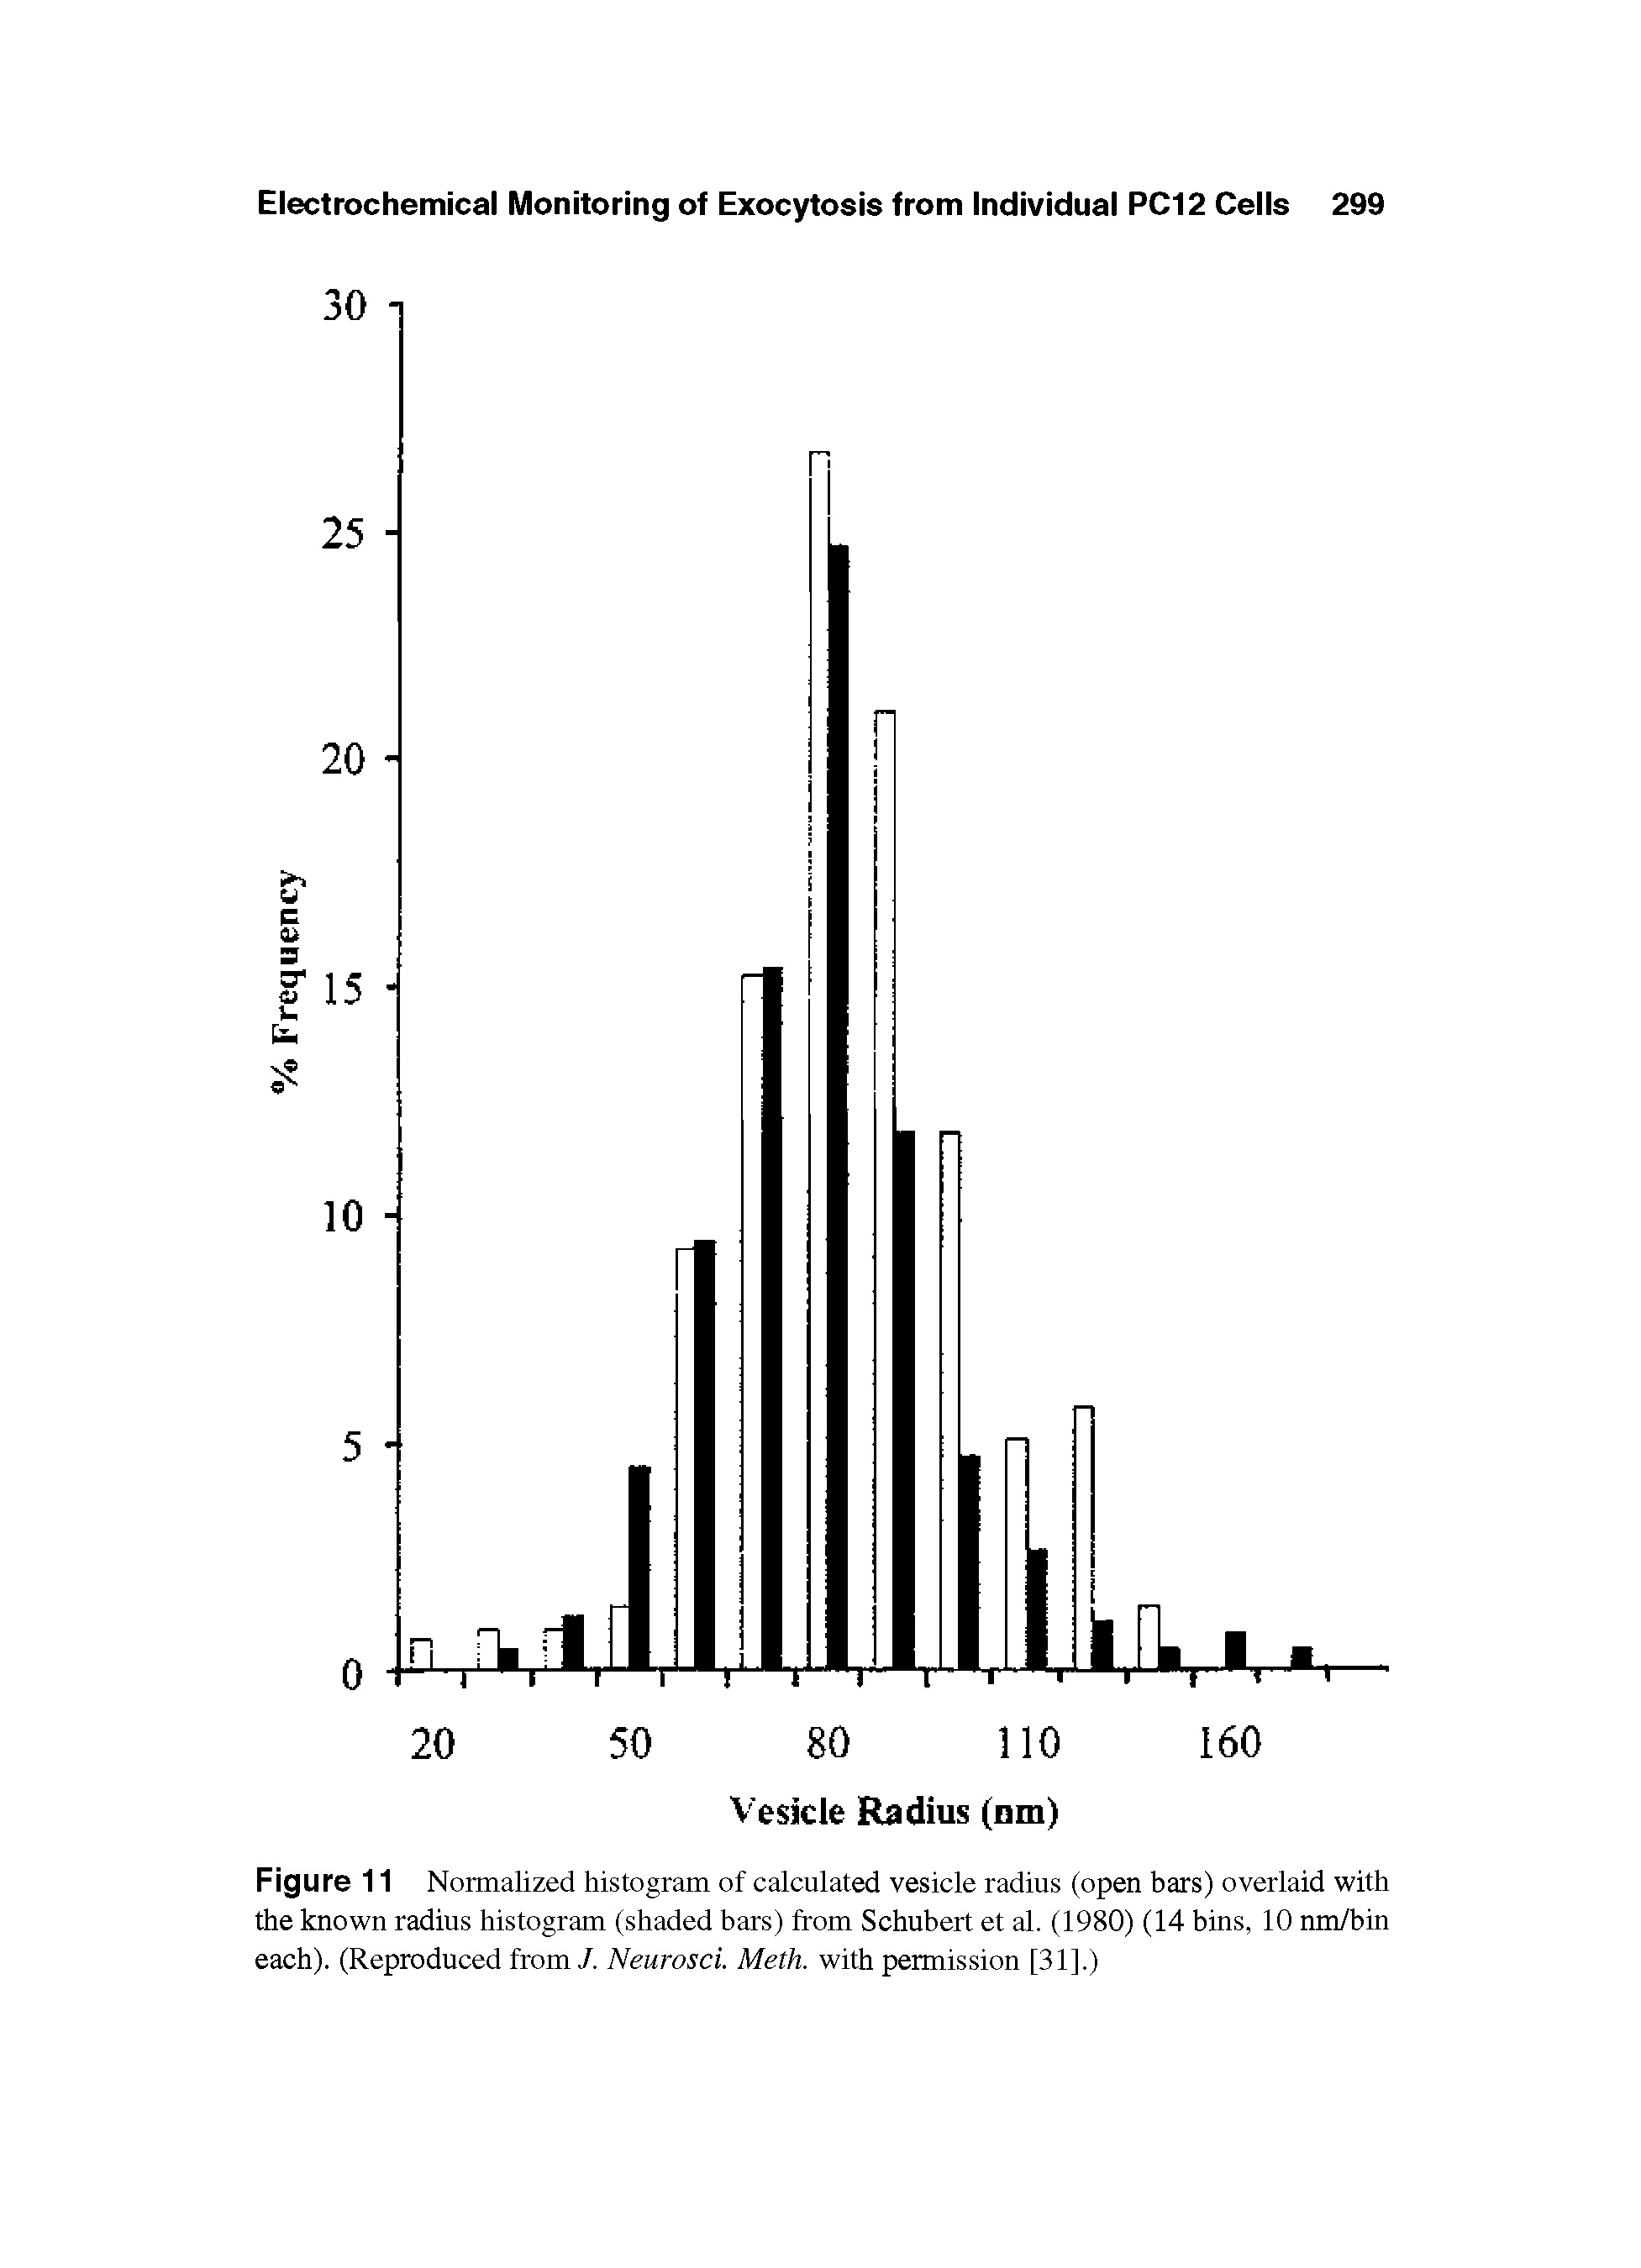 Figure 11 Normalized histogram of calculated vesicle radius (open bars) overlaid with the known radius histogram (shaded bars) from Schubert et al. (1980) (14 bins, 10 nm/bin each). (Reproduced from/. Neurosci. Meth. with permission [31].)...